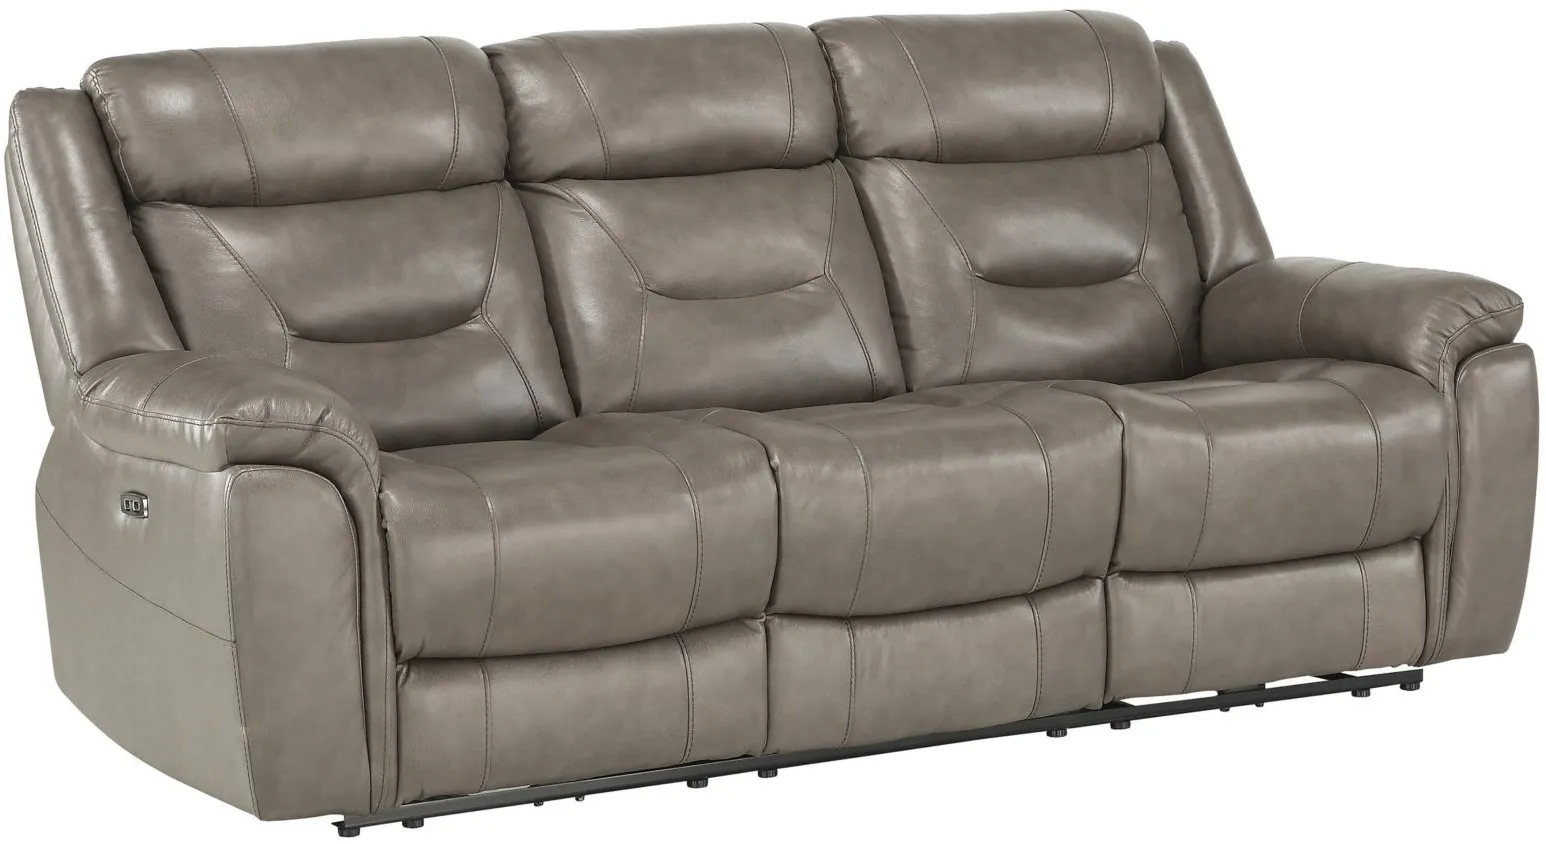 Northside Leather Power Reclining Sofa in Brownish Gray by Homelegance